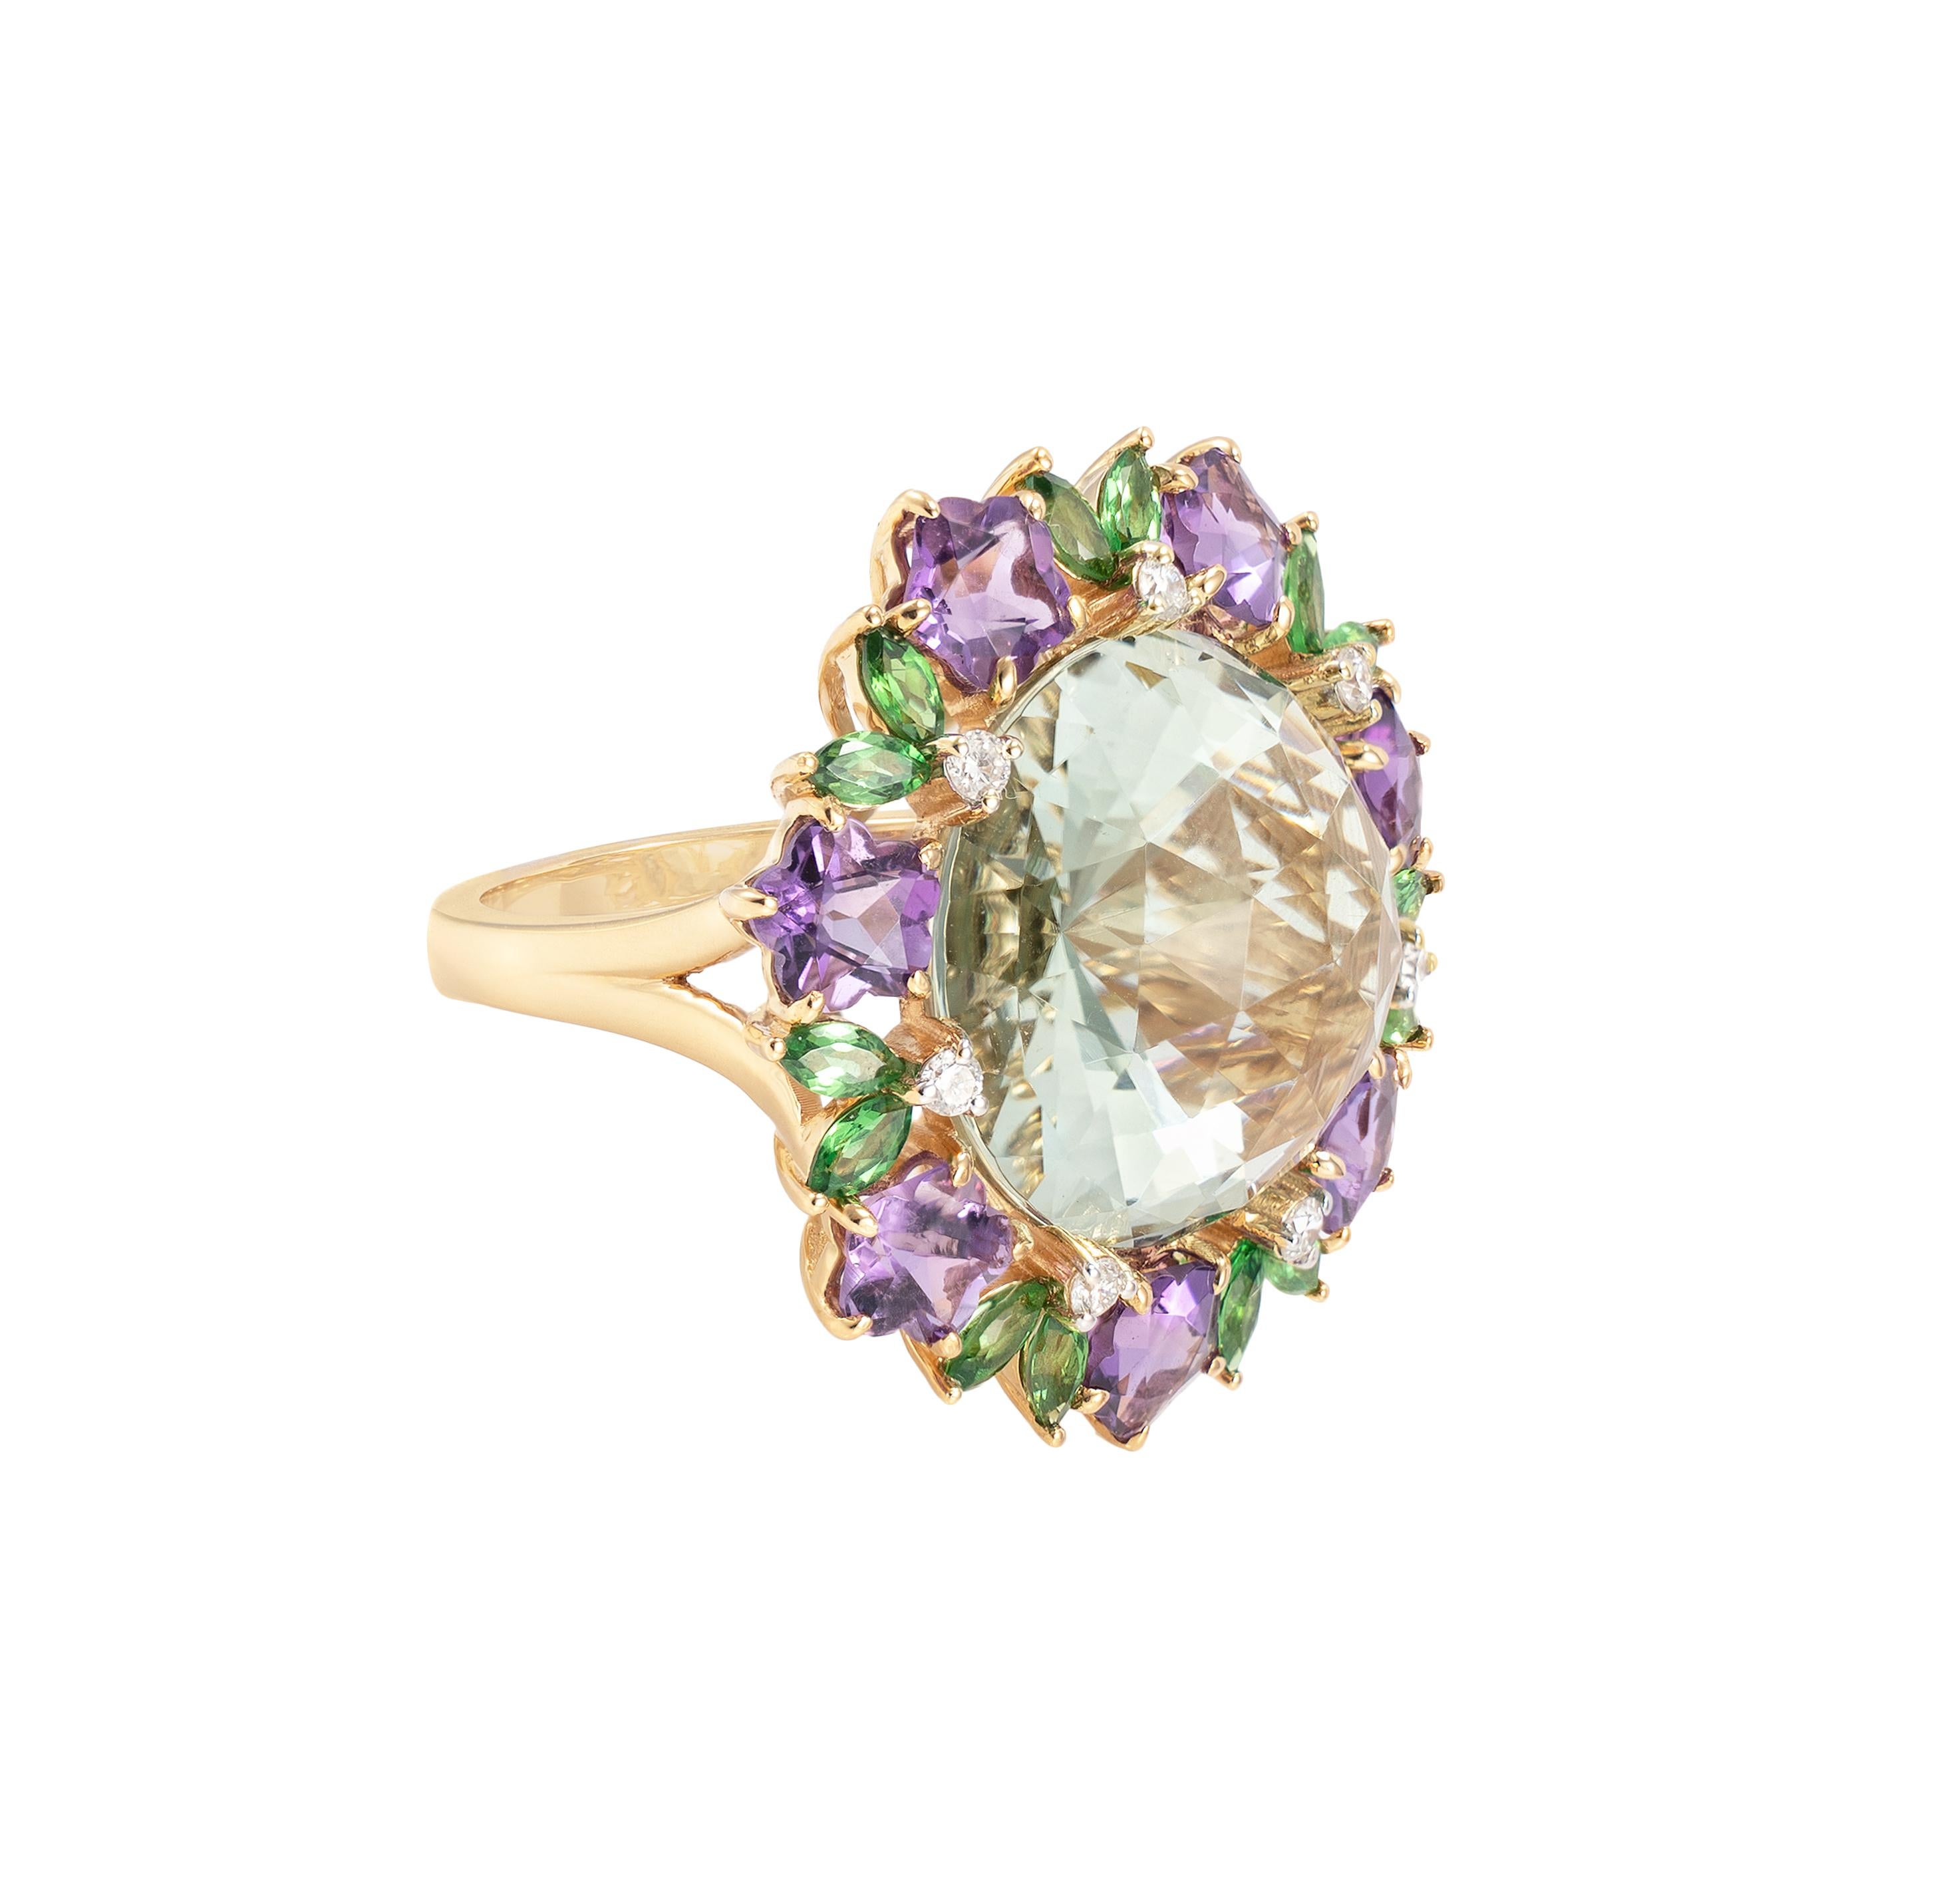 Sunita Nahata presents a collection of bold and colorful cocktail rings. This ring features a subtle yet eye-catching green amethyst at the center. The amethyst is accented with flower shaped amethysts, and marquise shaped tsavorites in a unique yet